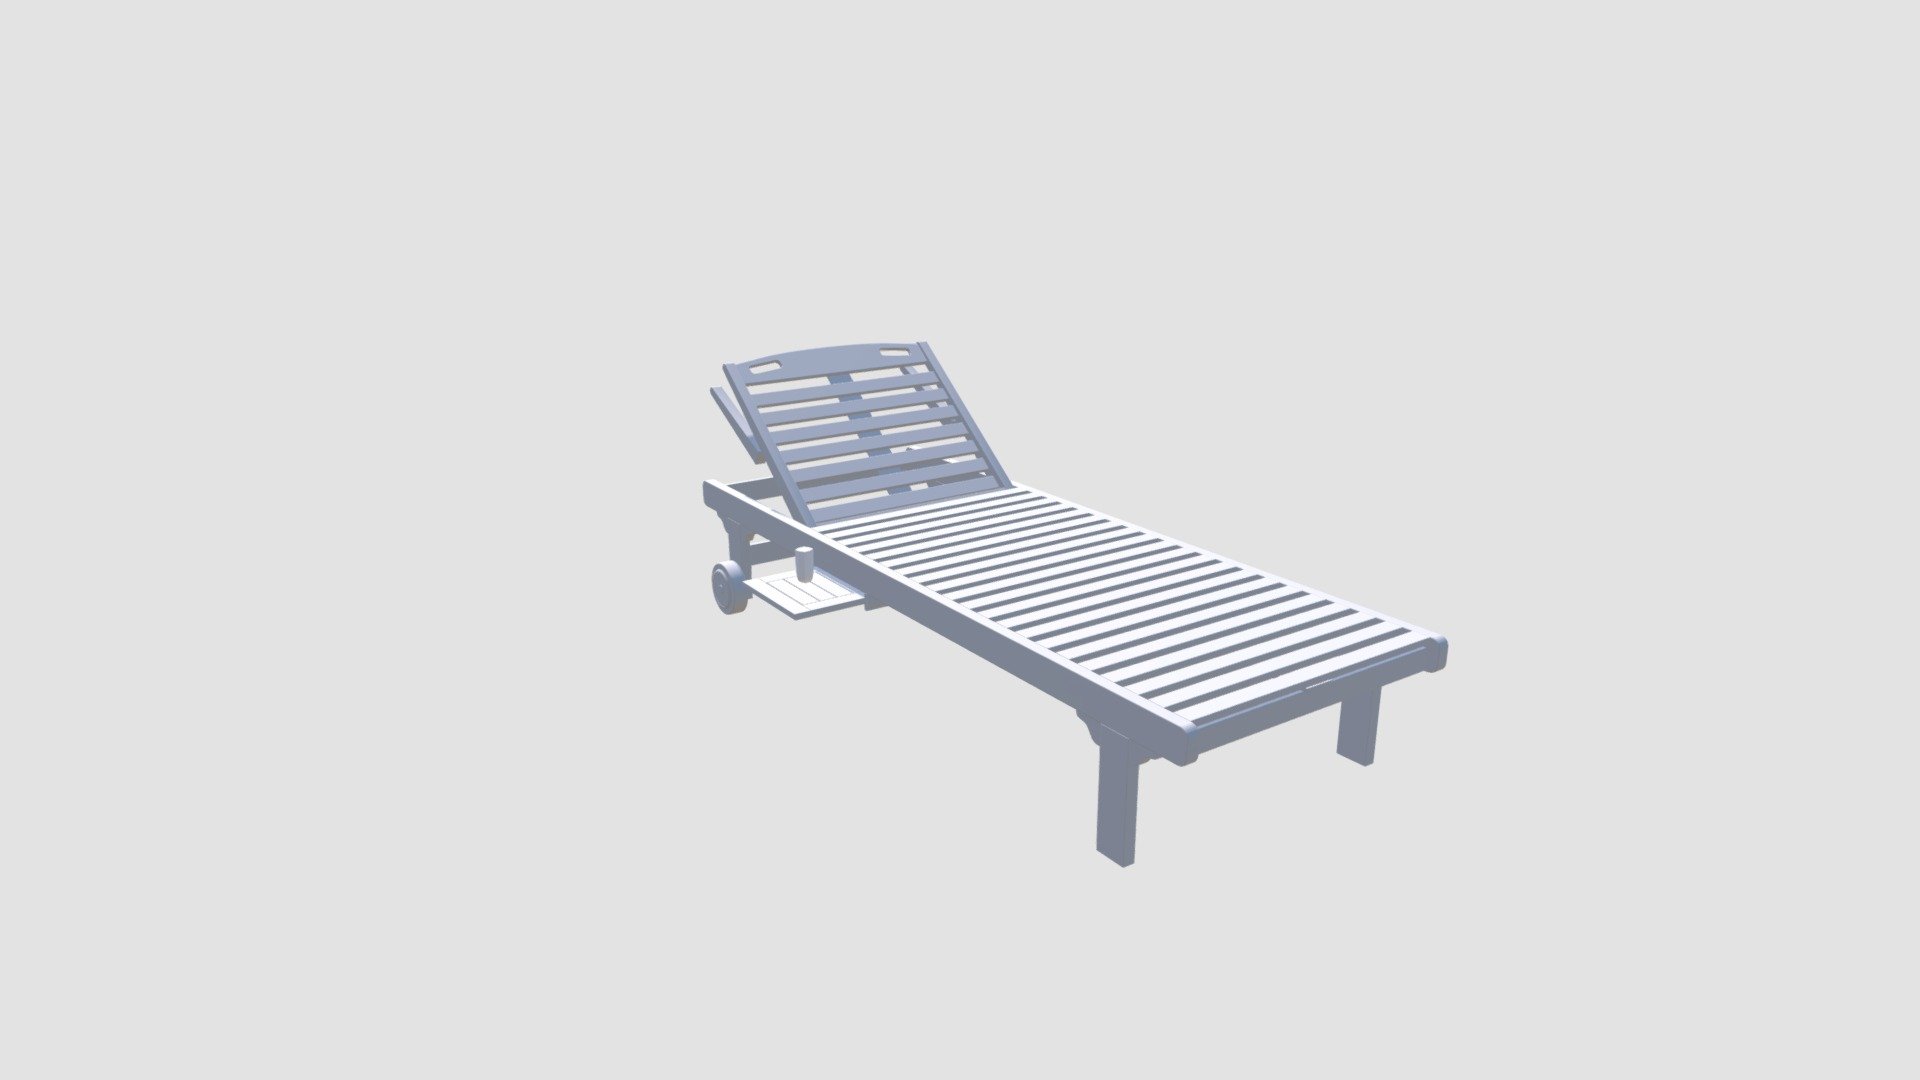 High detailed model of garden furniture with all textures, shaders and materials. It is ready to use, just put it into your scene 3d model